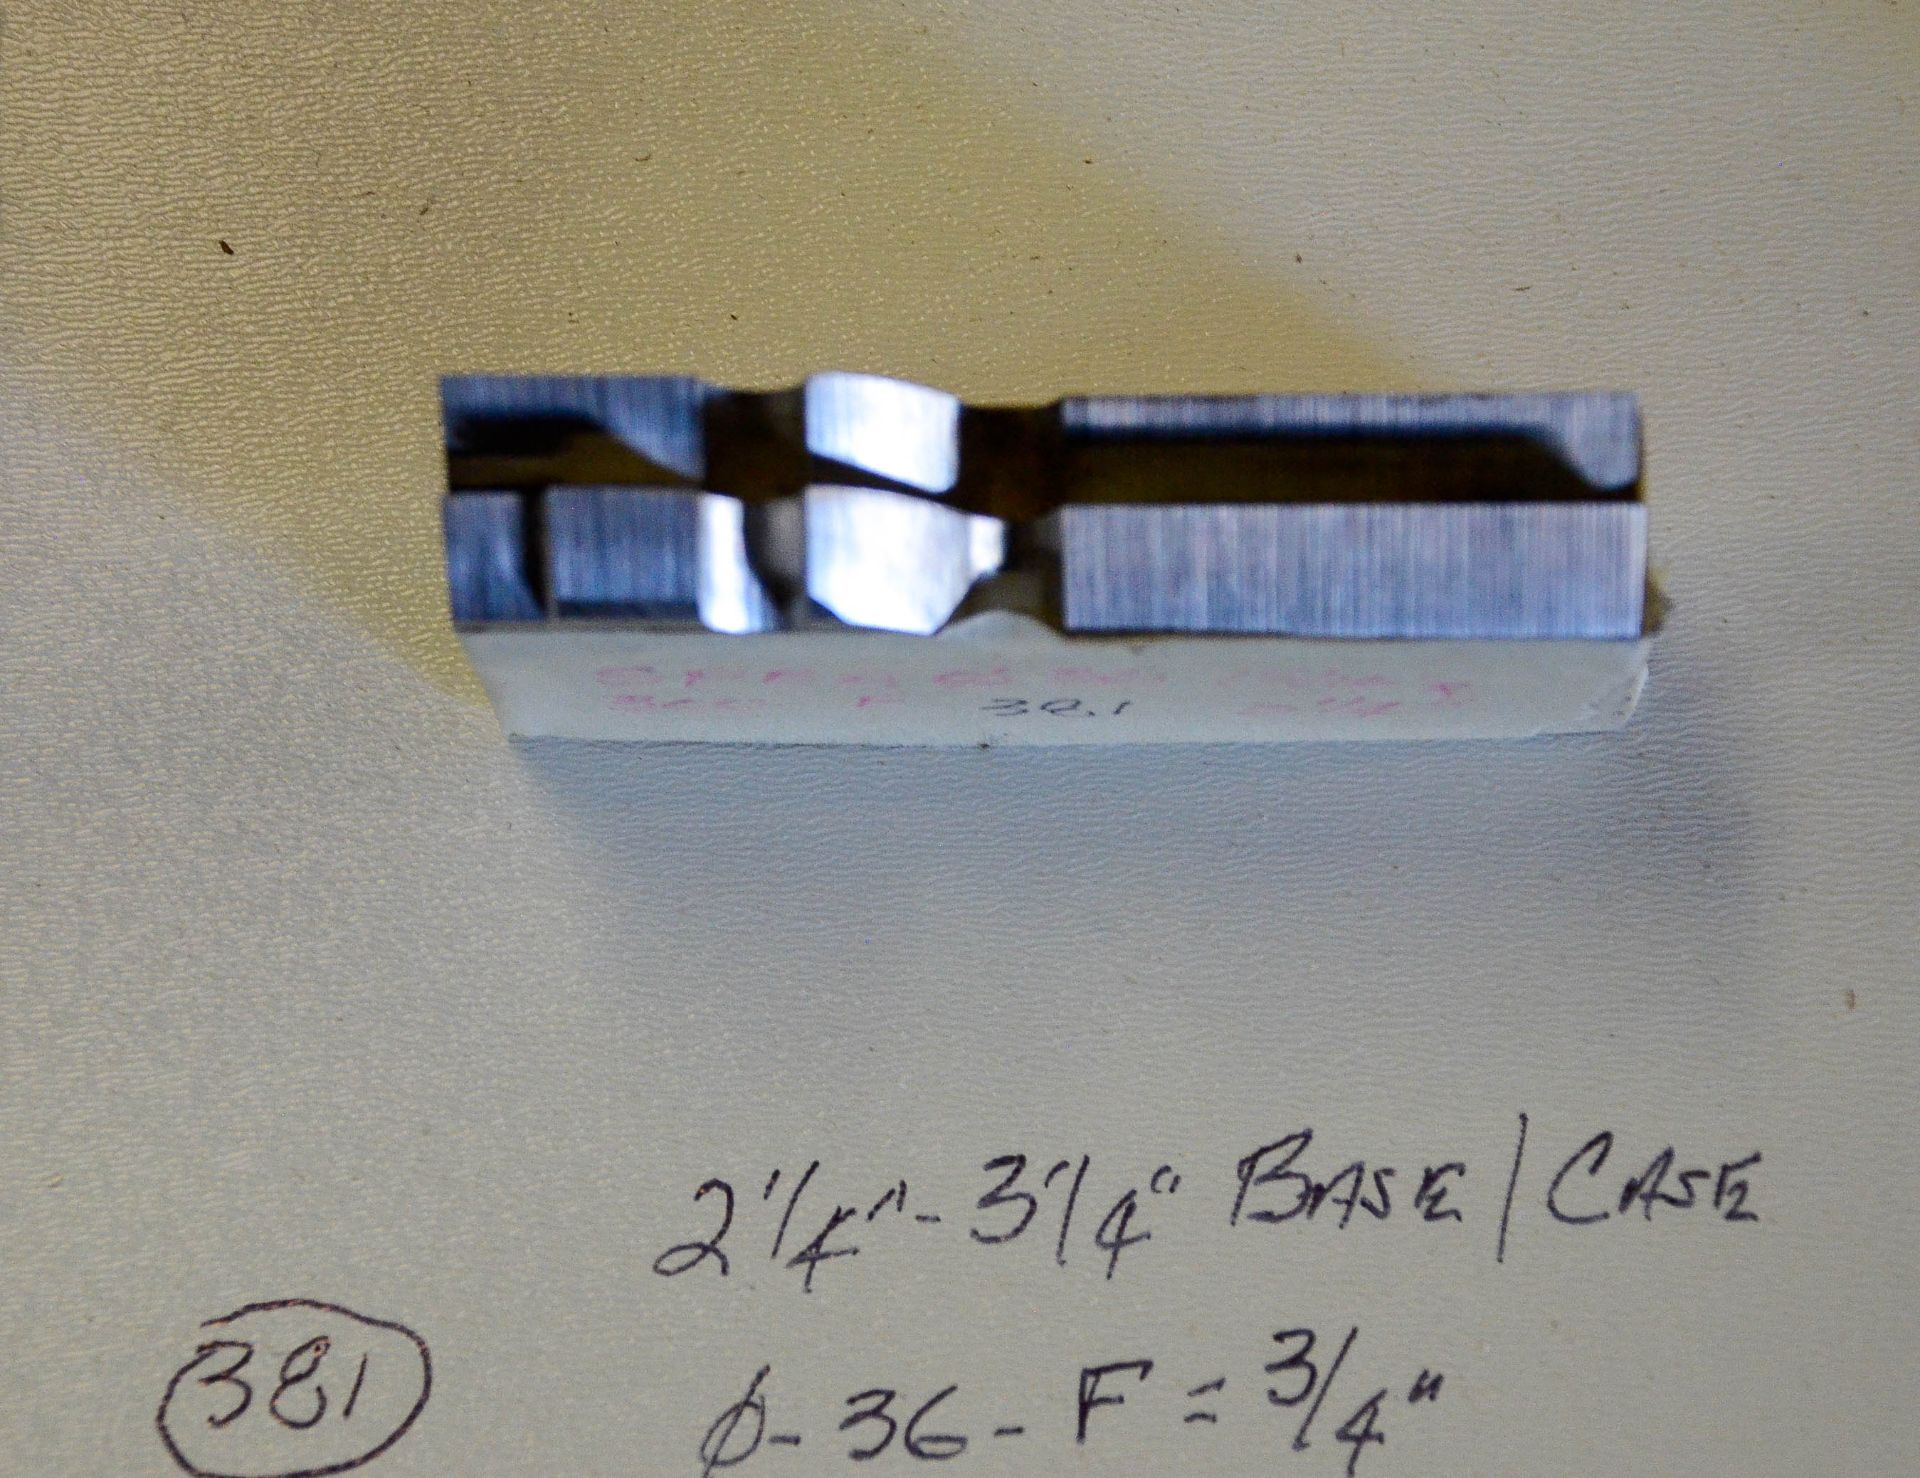 Moulding Knives, 2-1/4" - 3-1/4" Base/Case, 0 - 36 - F = 3/4", Knives are in Good Condition and - Image 2 of 2